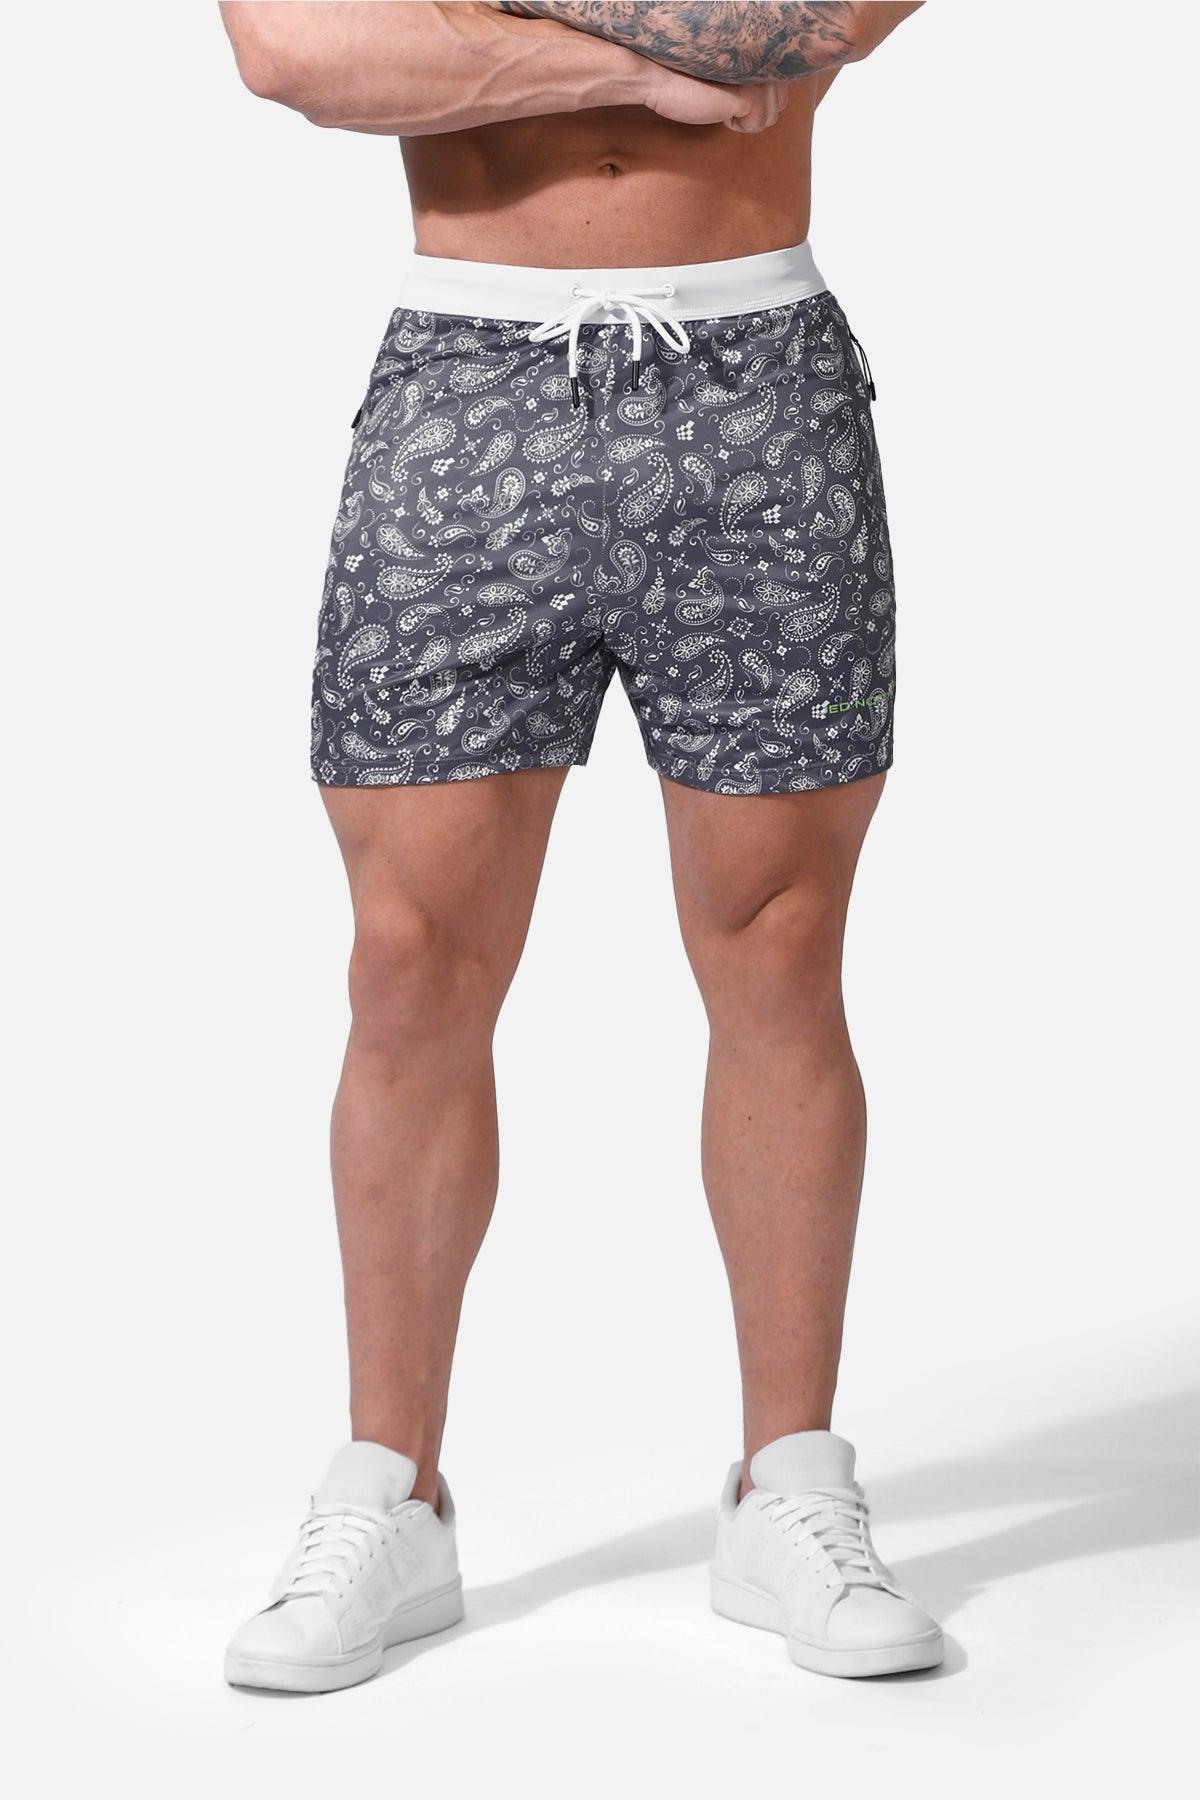 Ace Graphic Casual 5" Shorts 2.0 - Paisley - Jed North